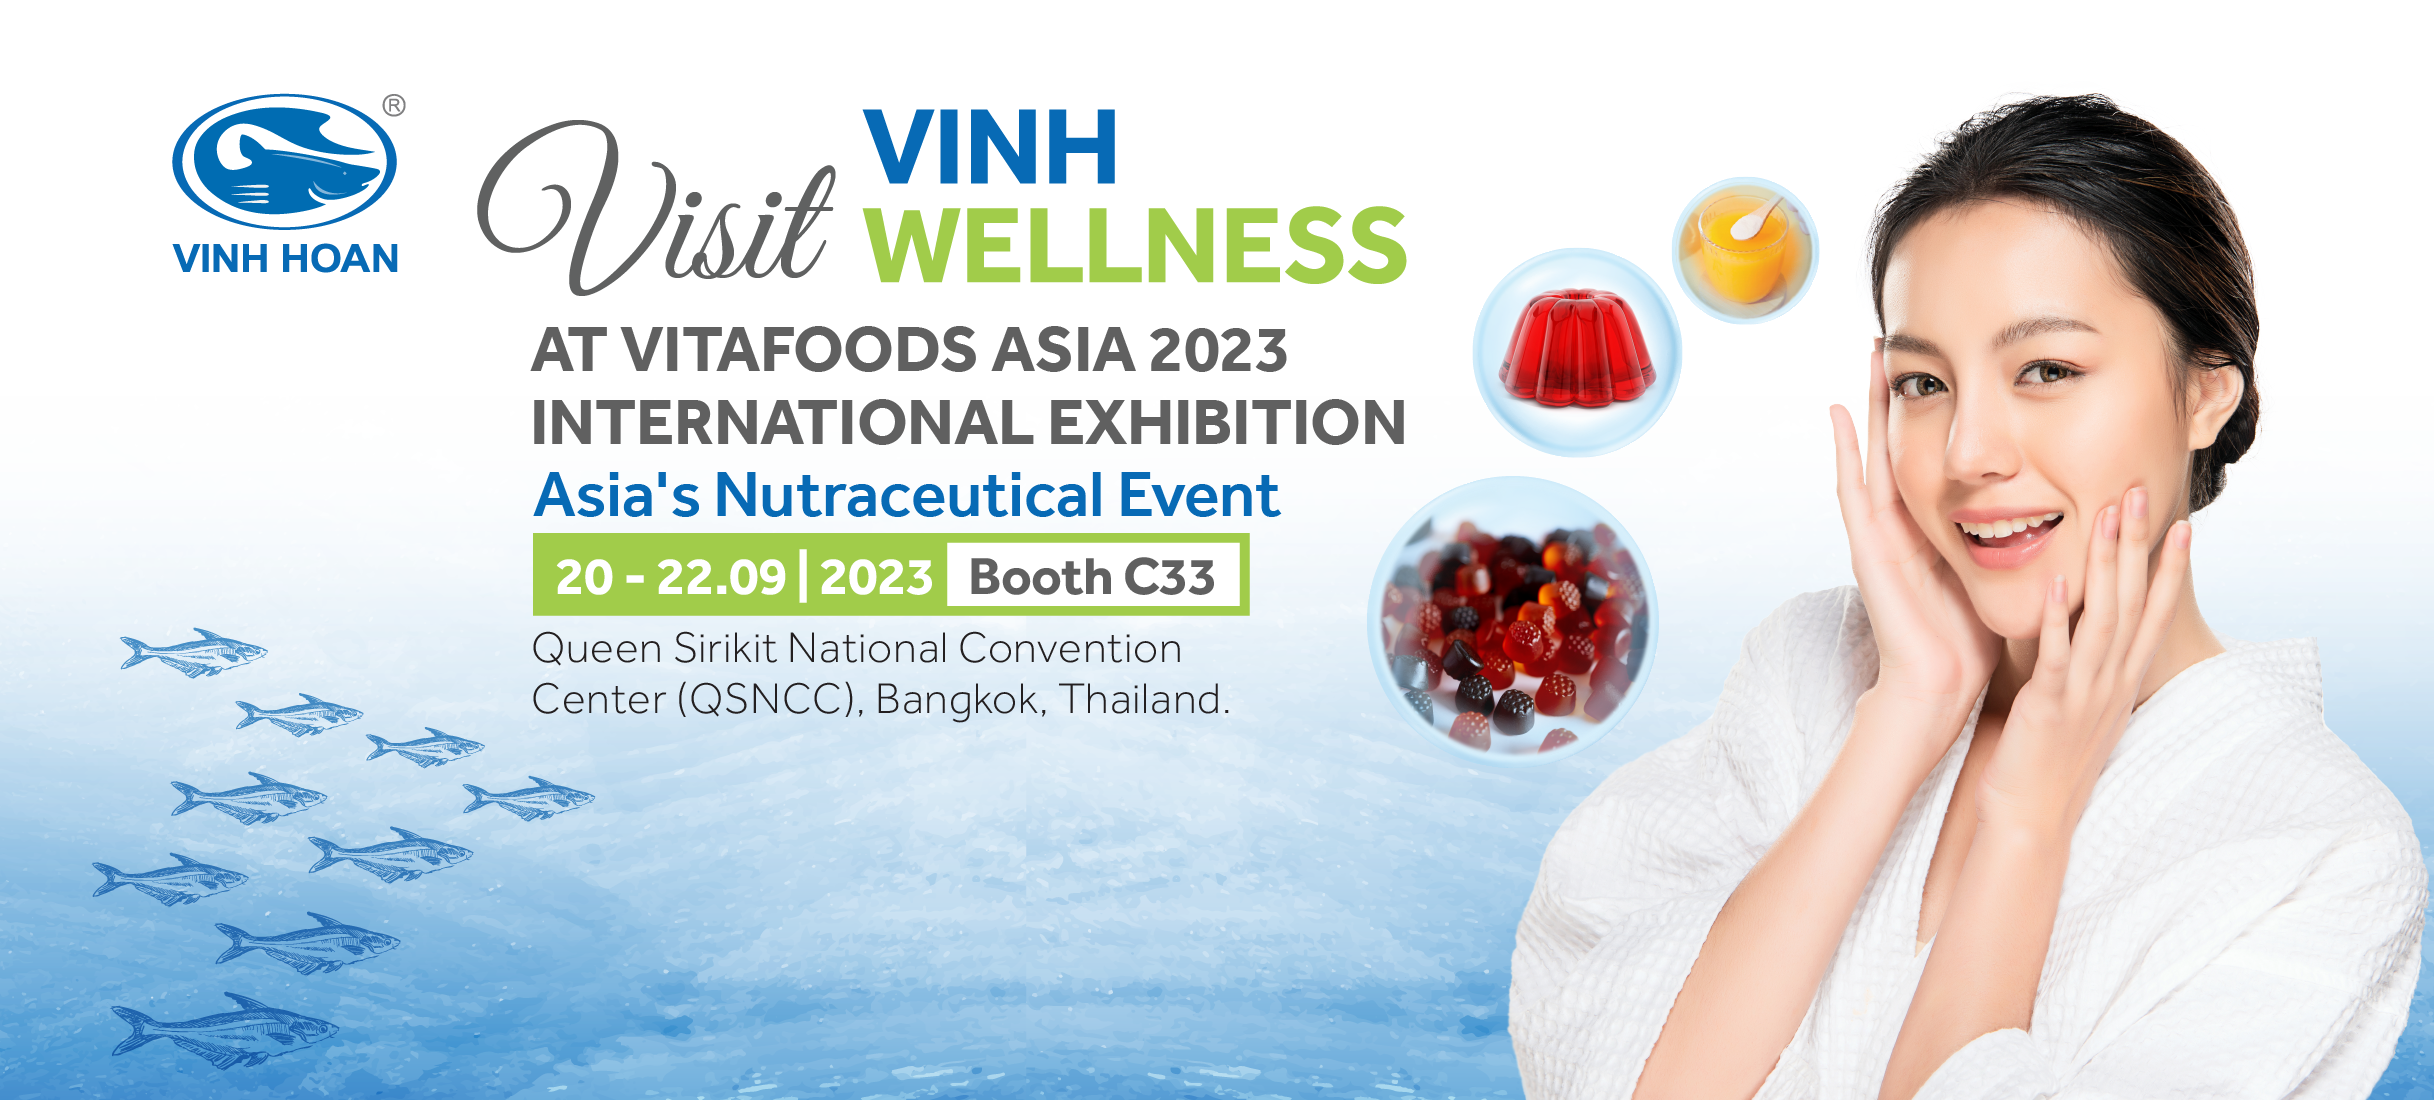 Join us at our booth in Vitafoods Asia 2023, Bangkok